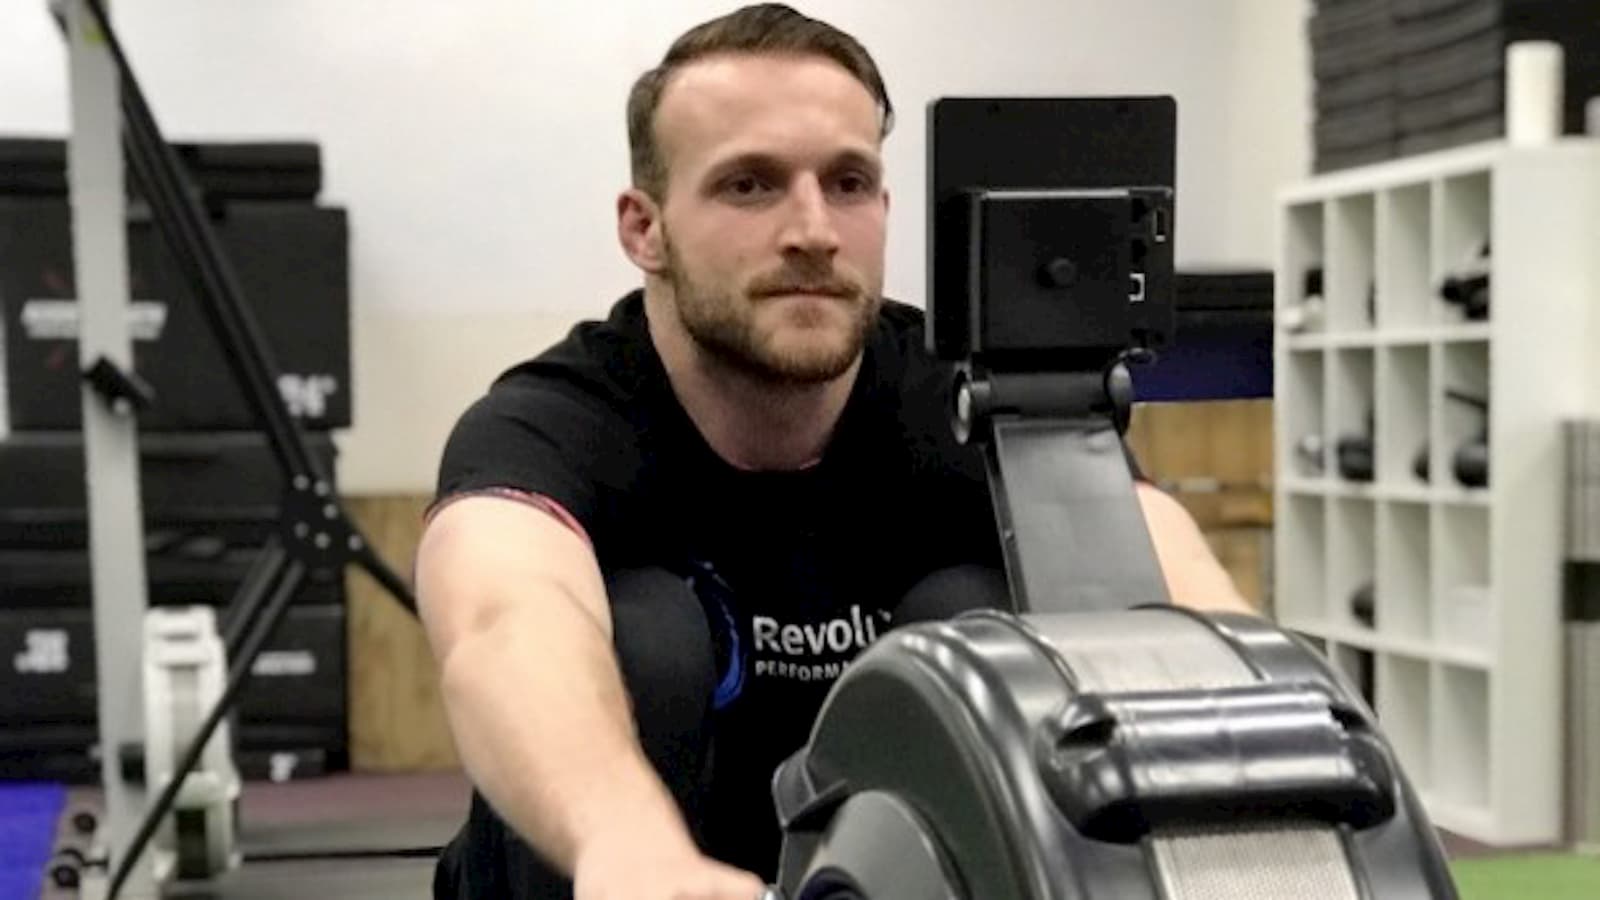 Interval training using the rower